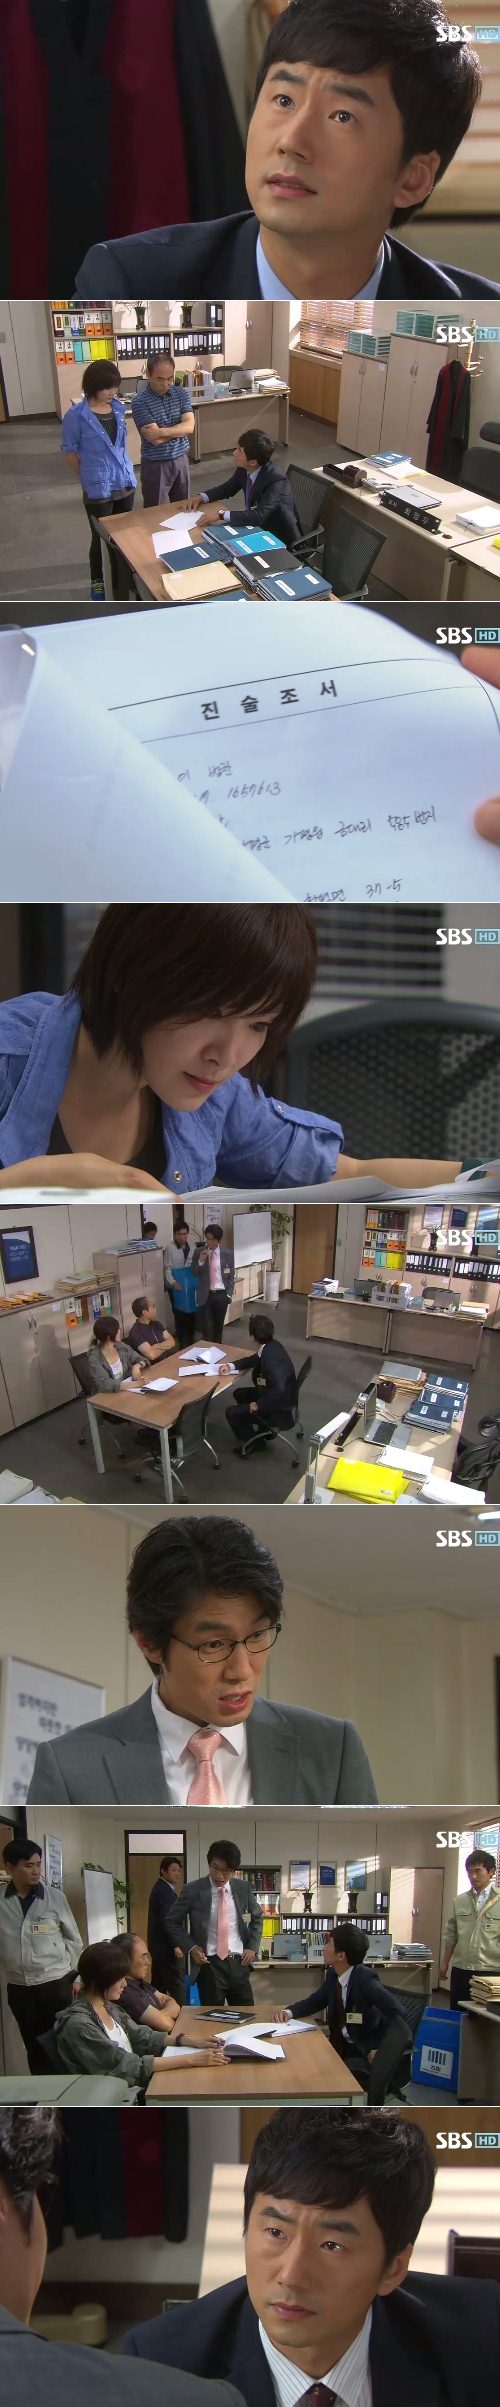 &quot;THE CHASER - Drama&quot; Ryoo Seung-soo gathered all evidence and statements but Song Yeong-gyoo comes along�